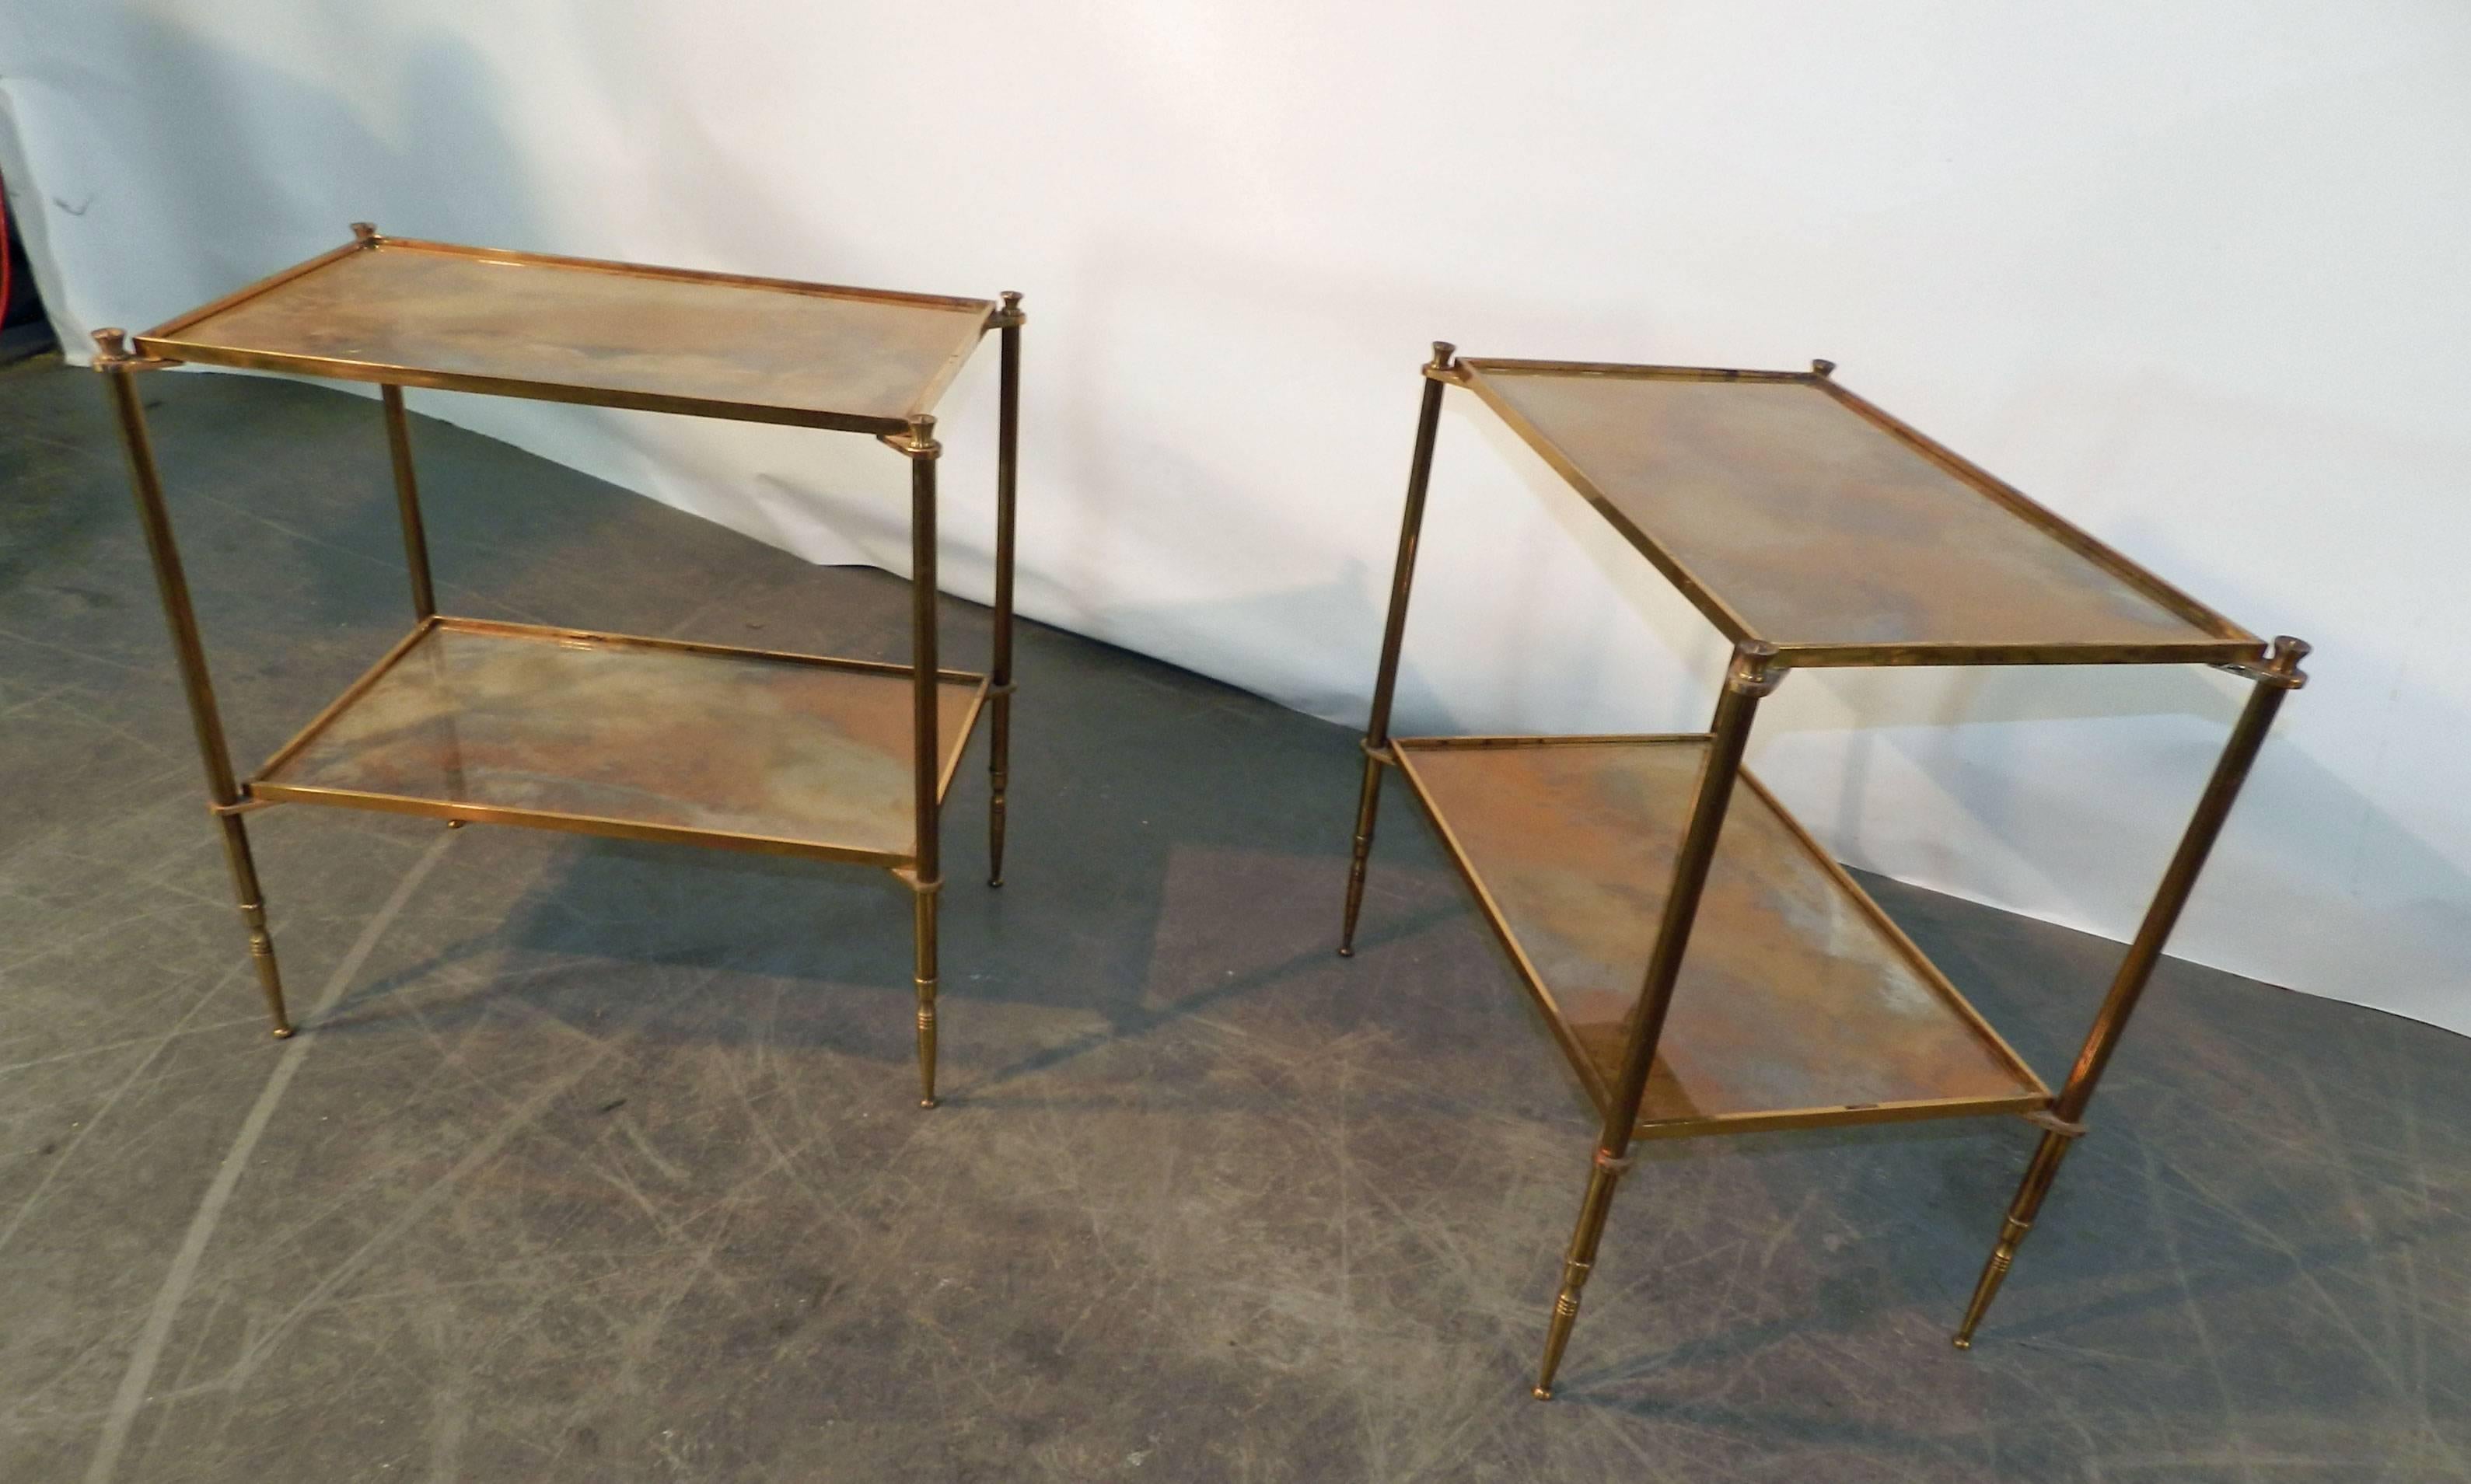 Maison Baguès, air of side tables in gilt metal, top in cloudy mirror.